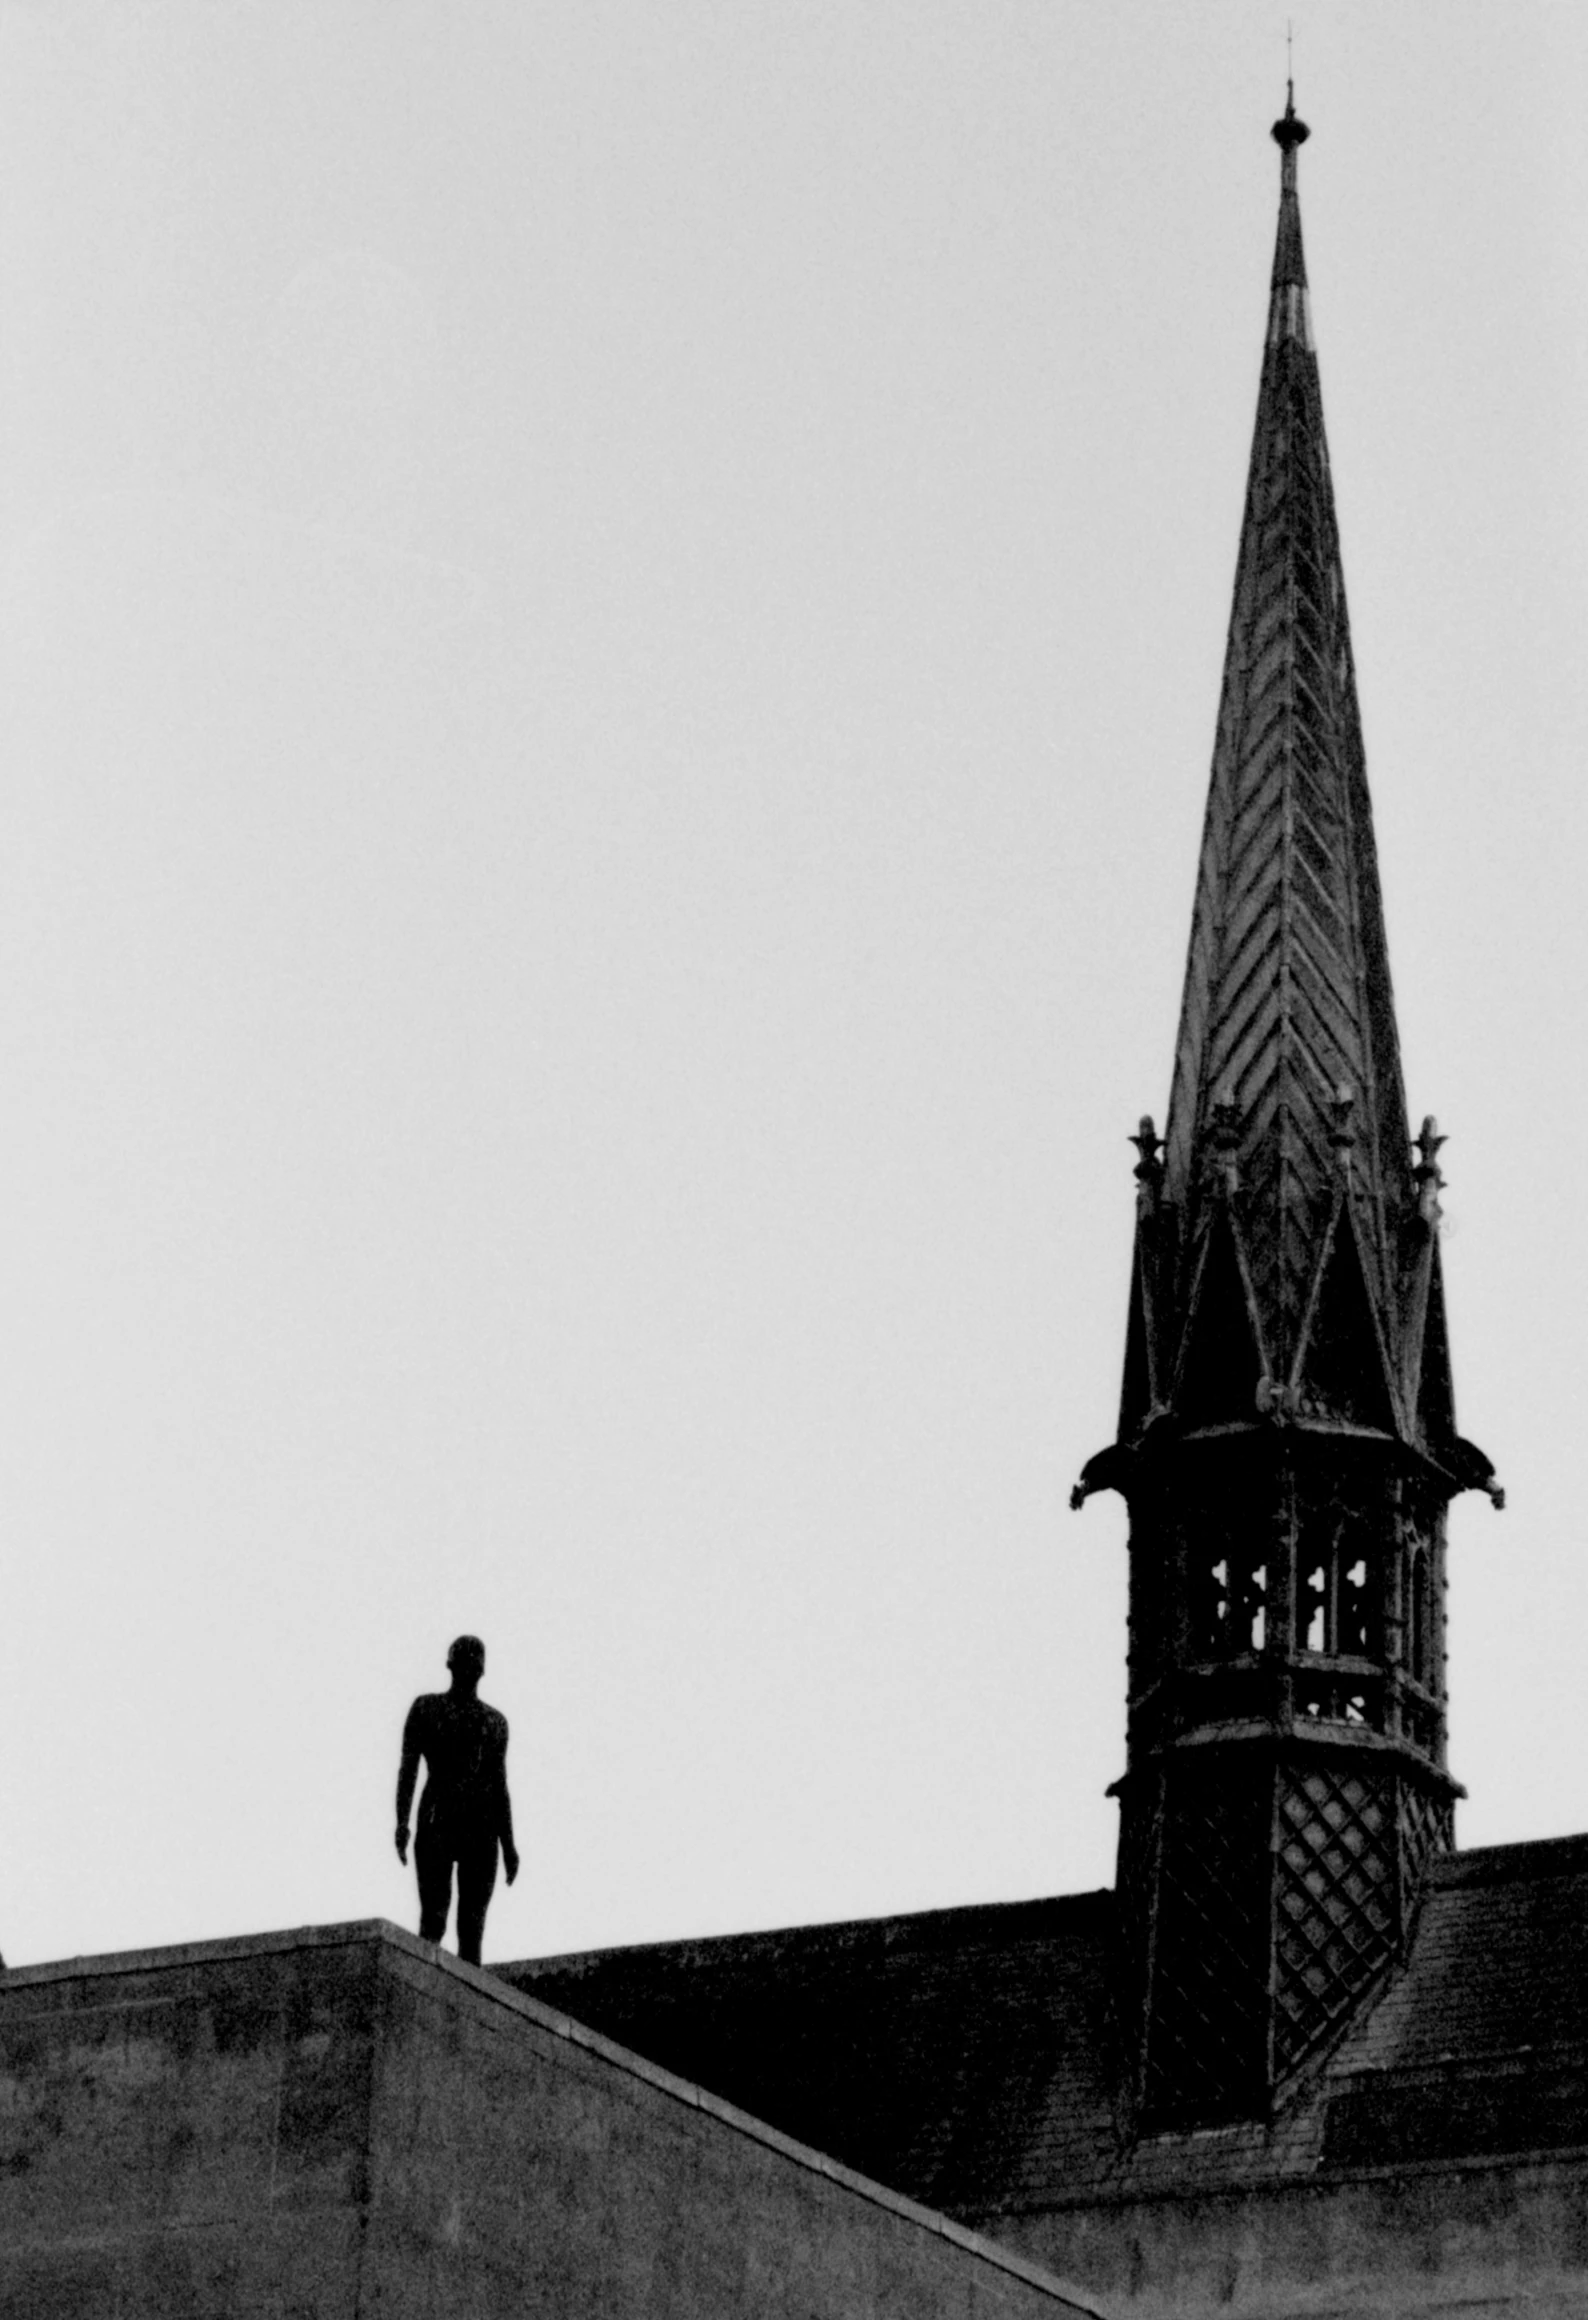 a black and white image of a person at the top of a church